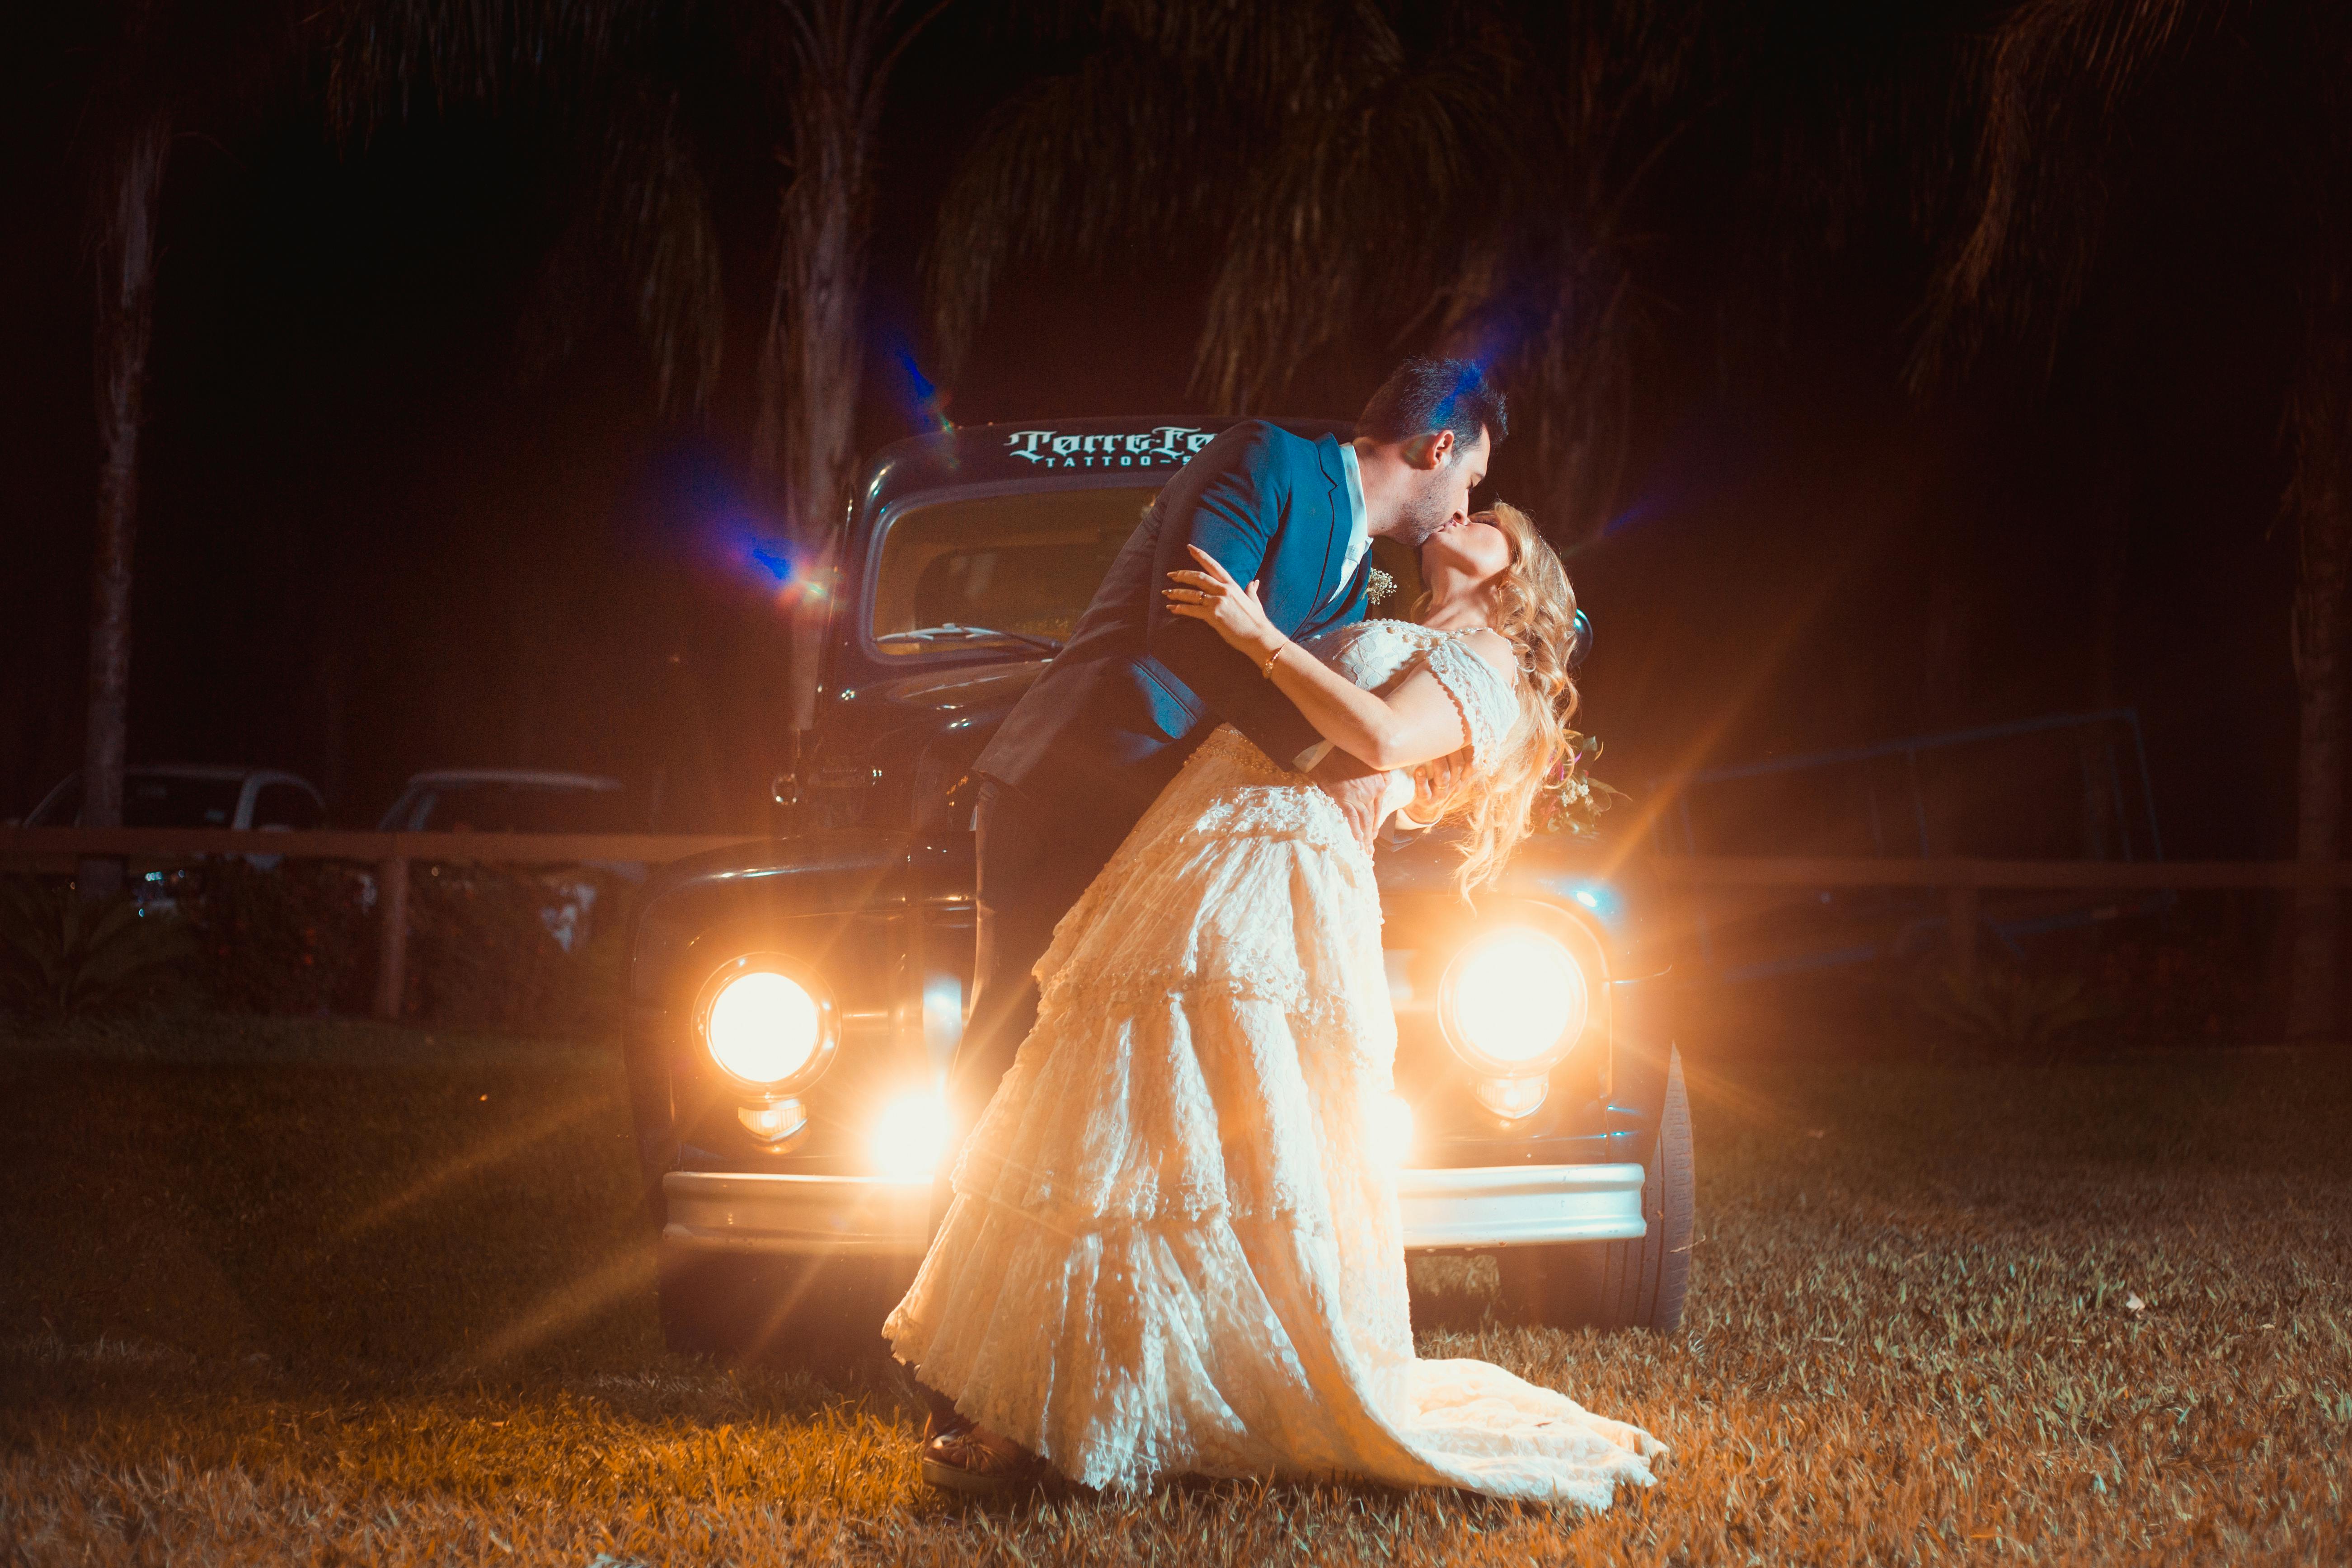 A man and woman kissing passionately in front of a car | Source: Pexels